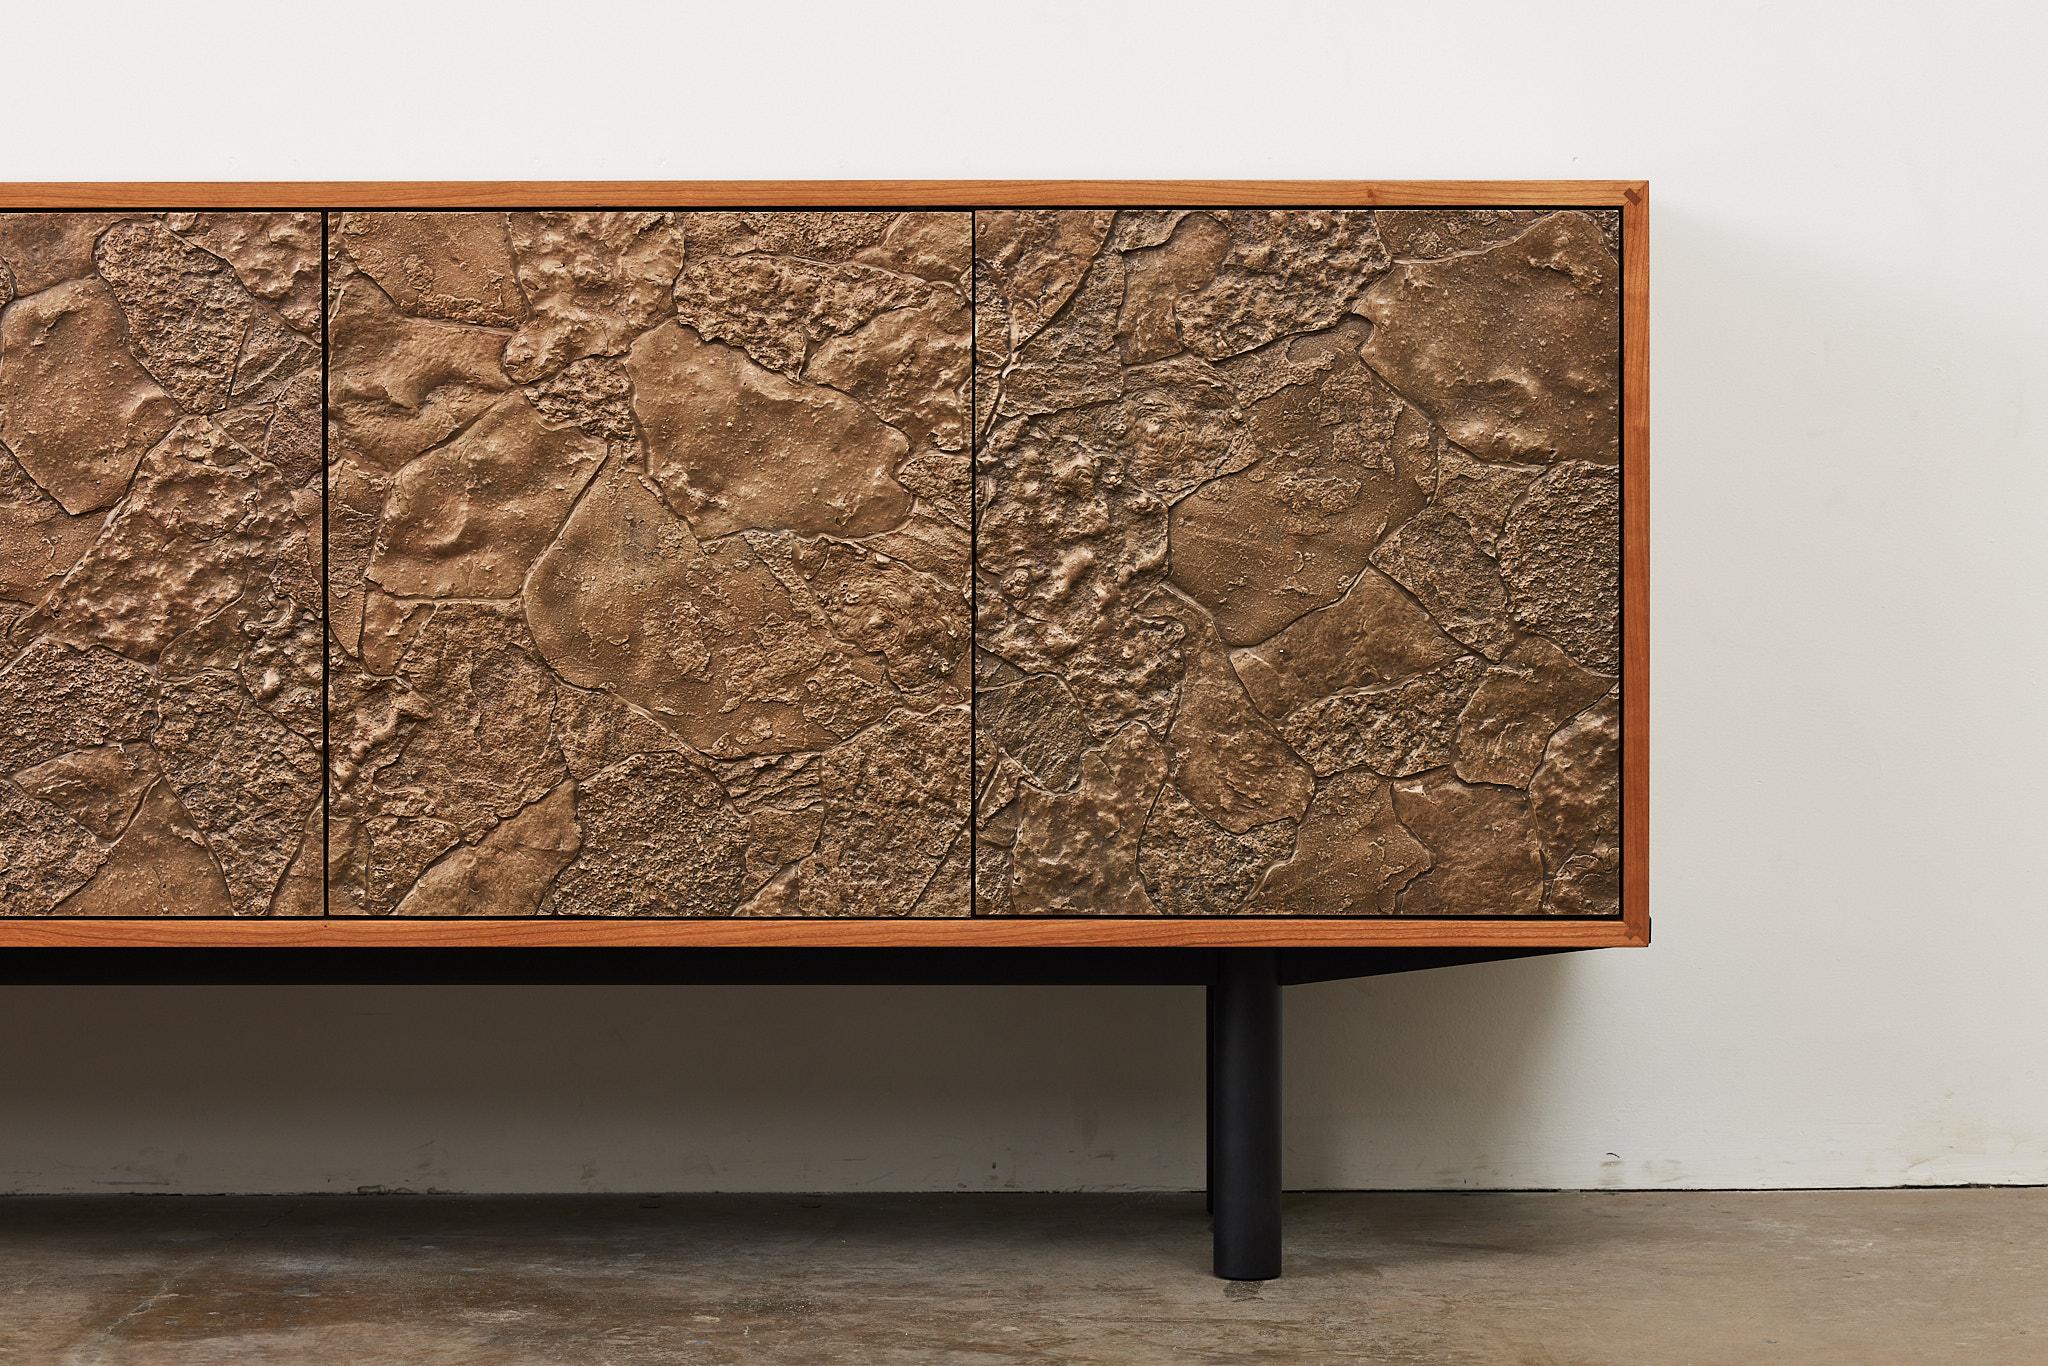 Crafted from cast bronze, steel, and cherry wood, the Borrowed Forms Credenza is the result of dozens of trips to forage for suitable stone formations in the Pacific Northwest. Hot jeweler’s wax is poured in place overtop of the found stones, and